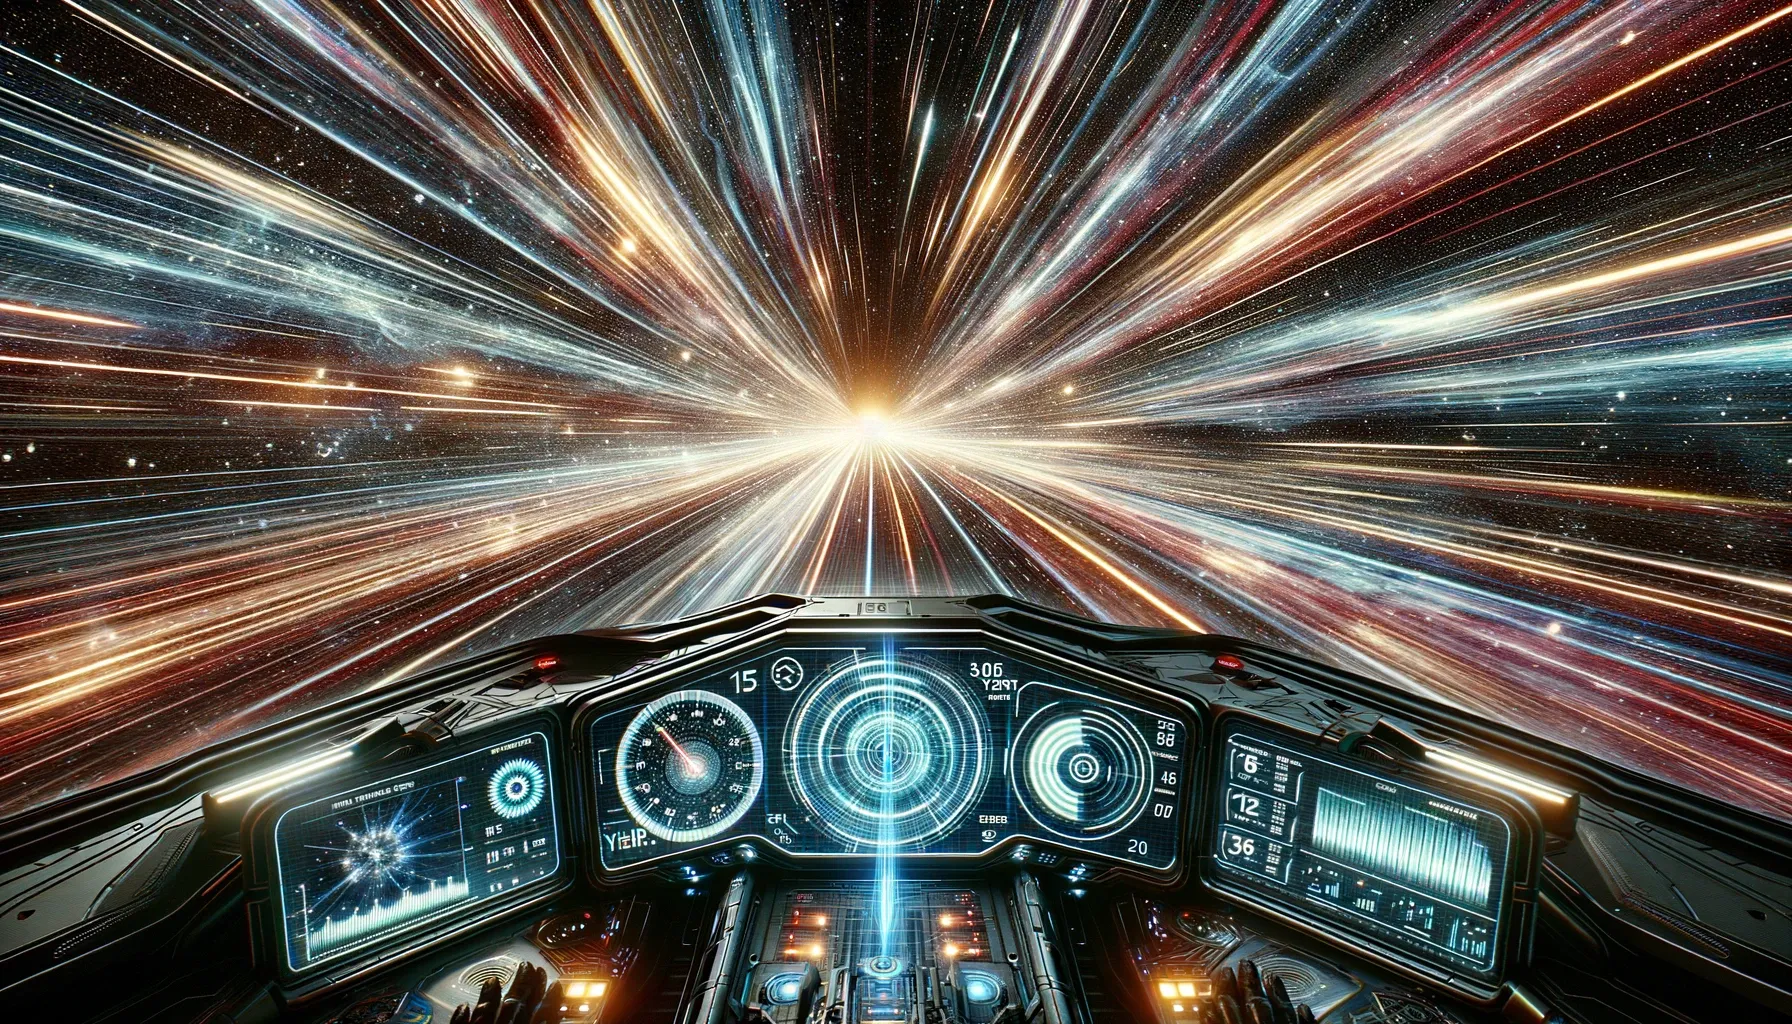 What Happens If You Travel at the Speed of Light for 5 Years